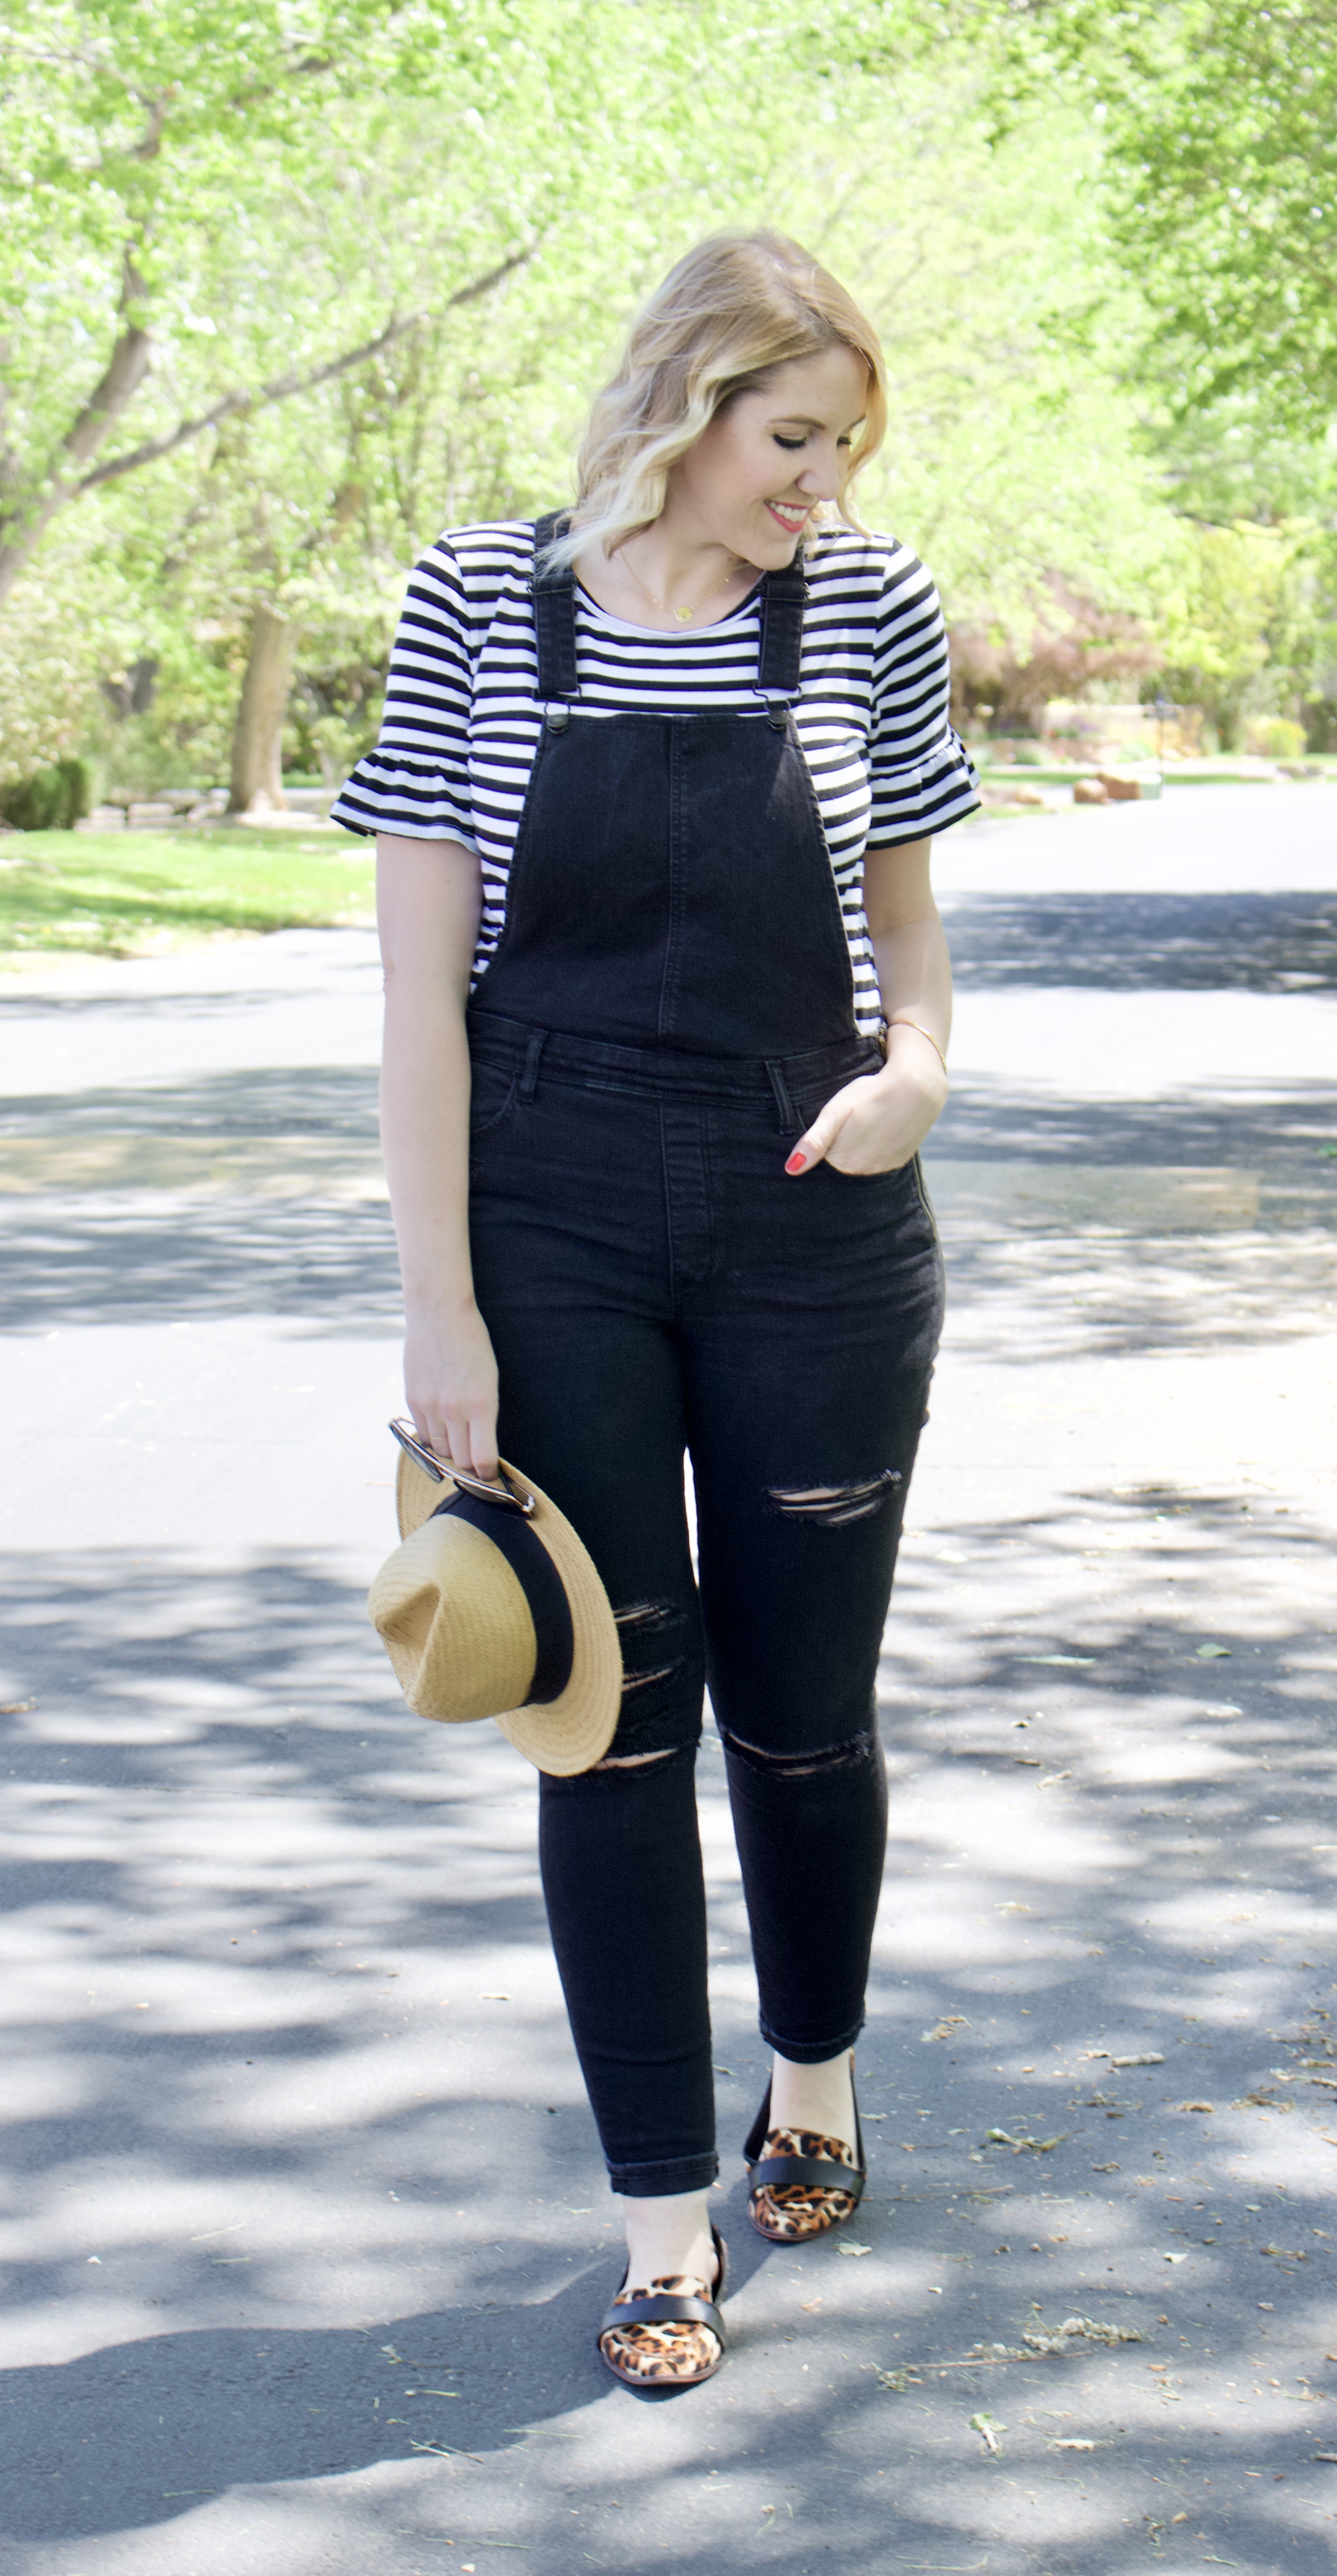 the weekly style edit fashion link up overalls #overalls #linkup #fashionblogger #styleblogger